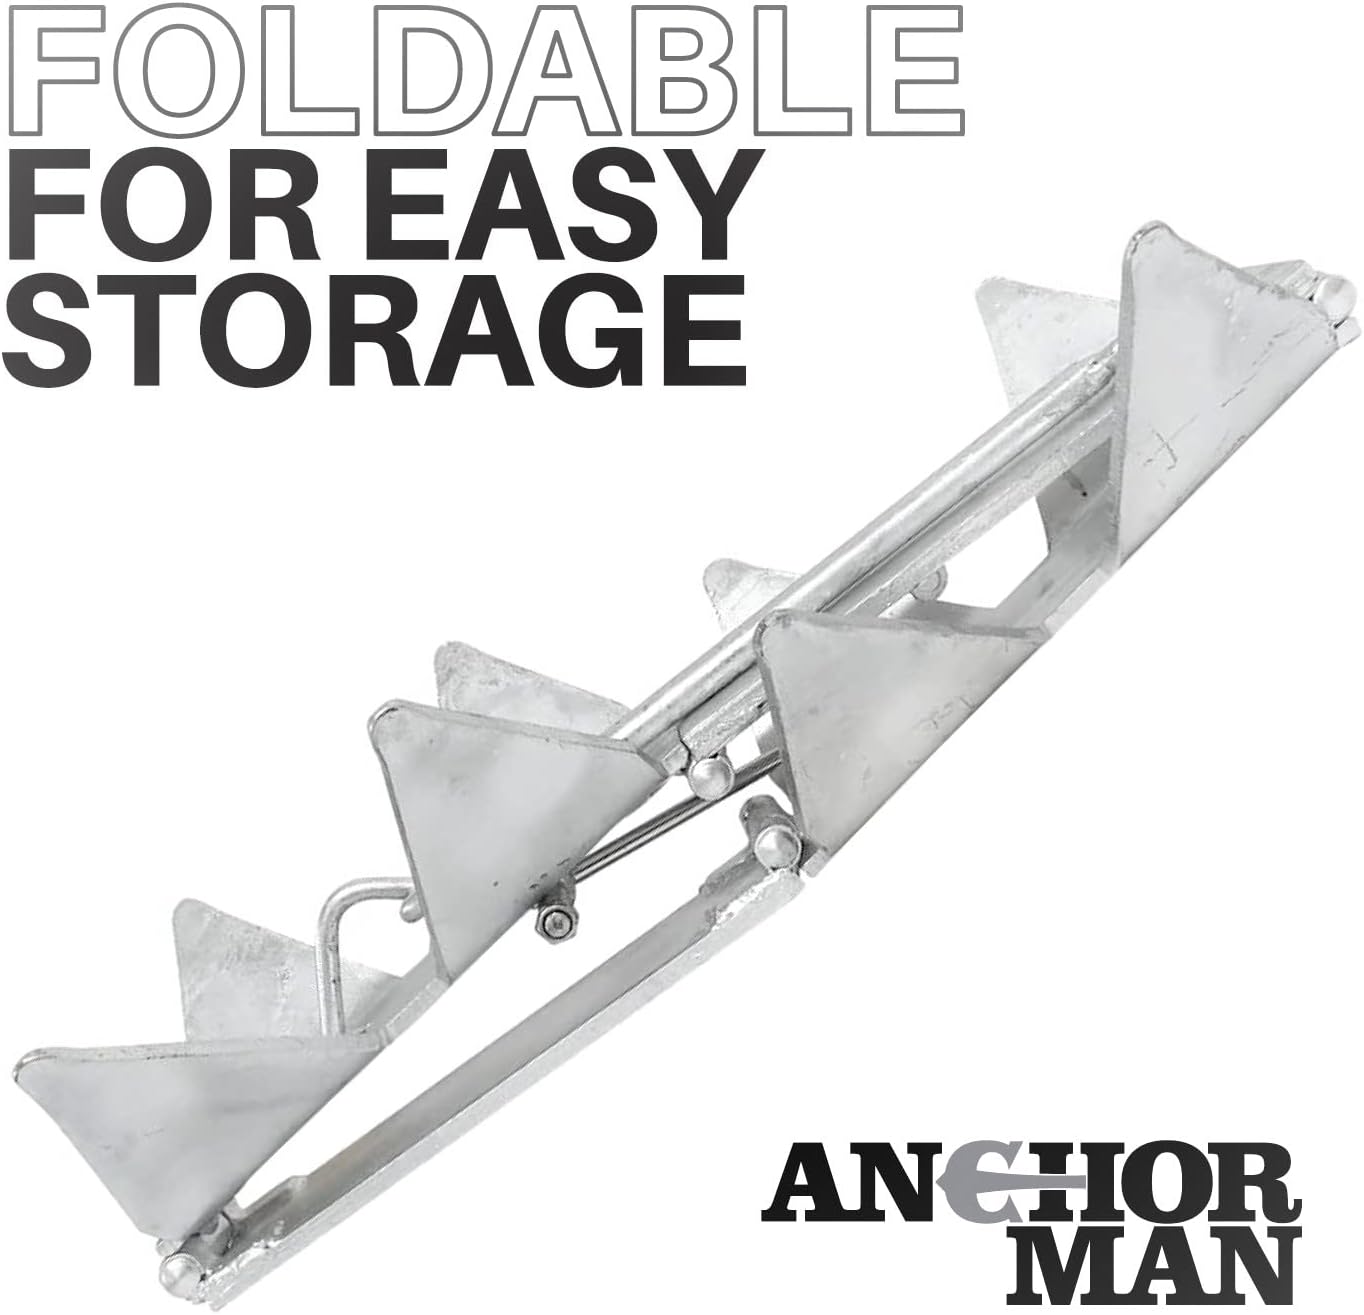 Anchor-Man Boat Slide Box Anchors, 100% Hot Dipped Galvanized Foldable Sliding Cube Anchor Suitable for 23 to 40ft Offshore Sport Boats, Pontoon Boats (13 lbs / 19 lbs / 25 lbs)